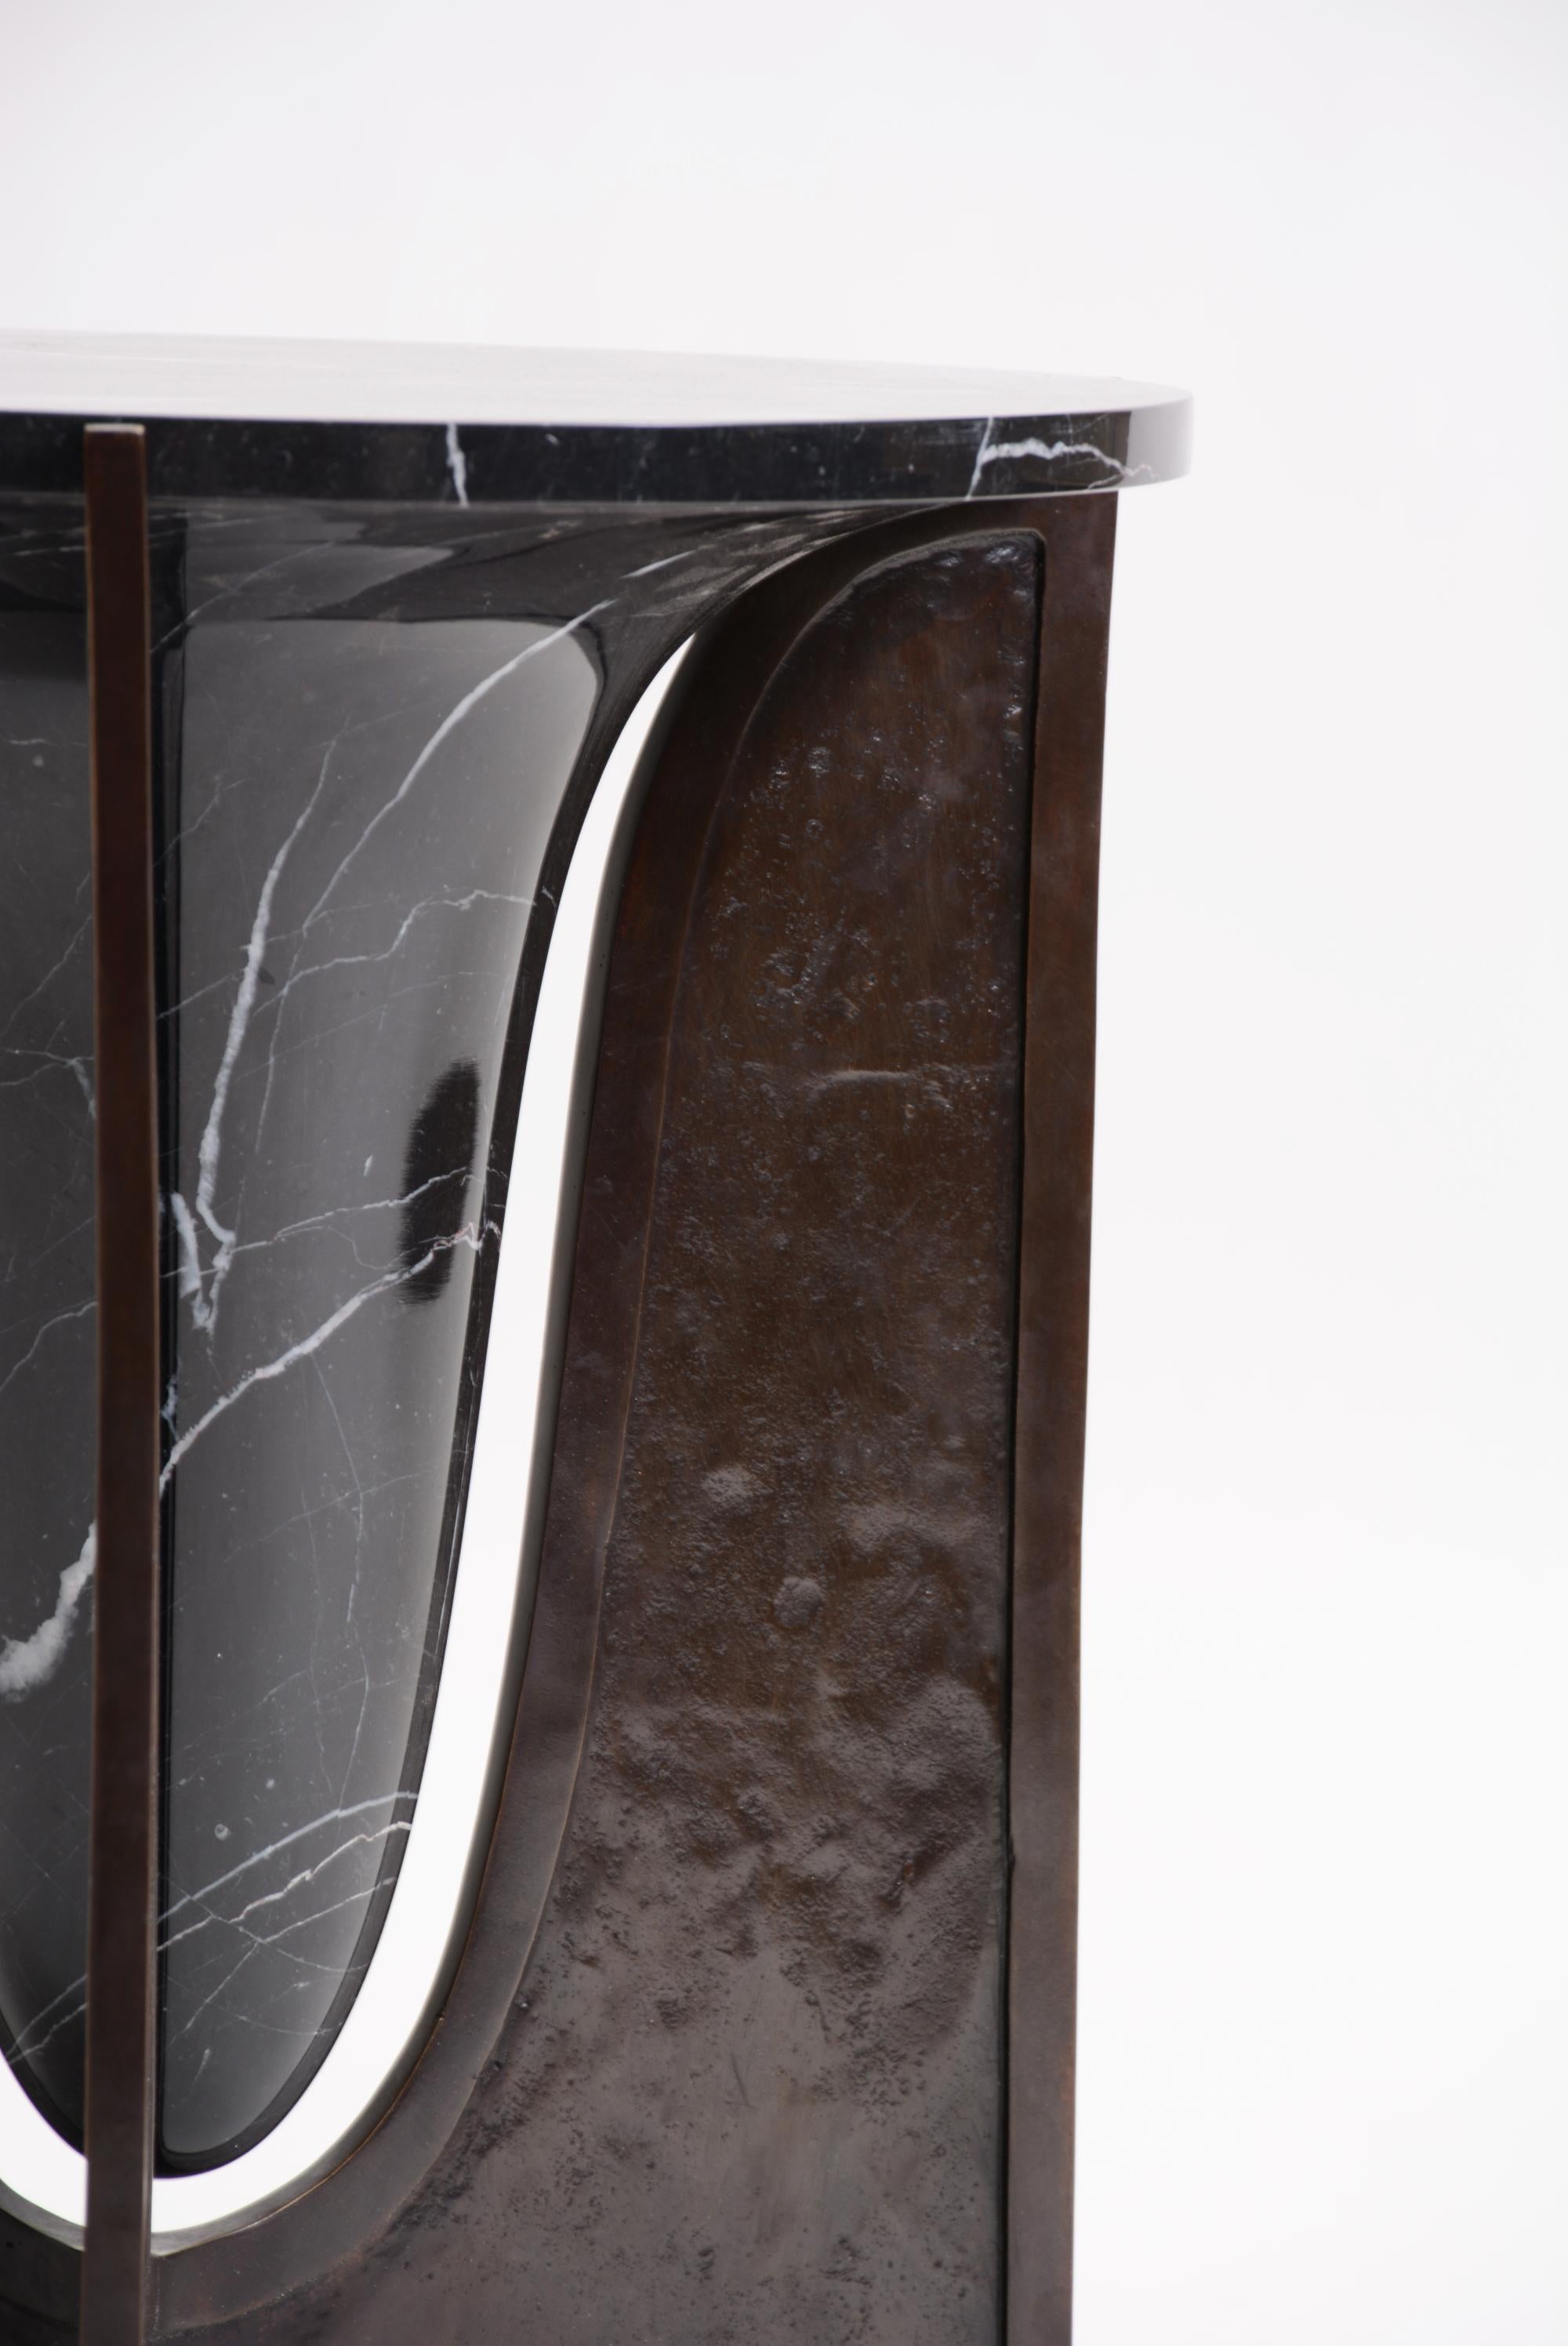 Baltoro Side Table in Cast Bronze and Black or White Marble by Elan Atelier

The name comes from the Baltoro Mountain range known for its sharp peaks and steep rock formations. Baltoro’s cast bronze base suspends the solid marble top which seems to